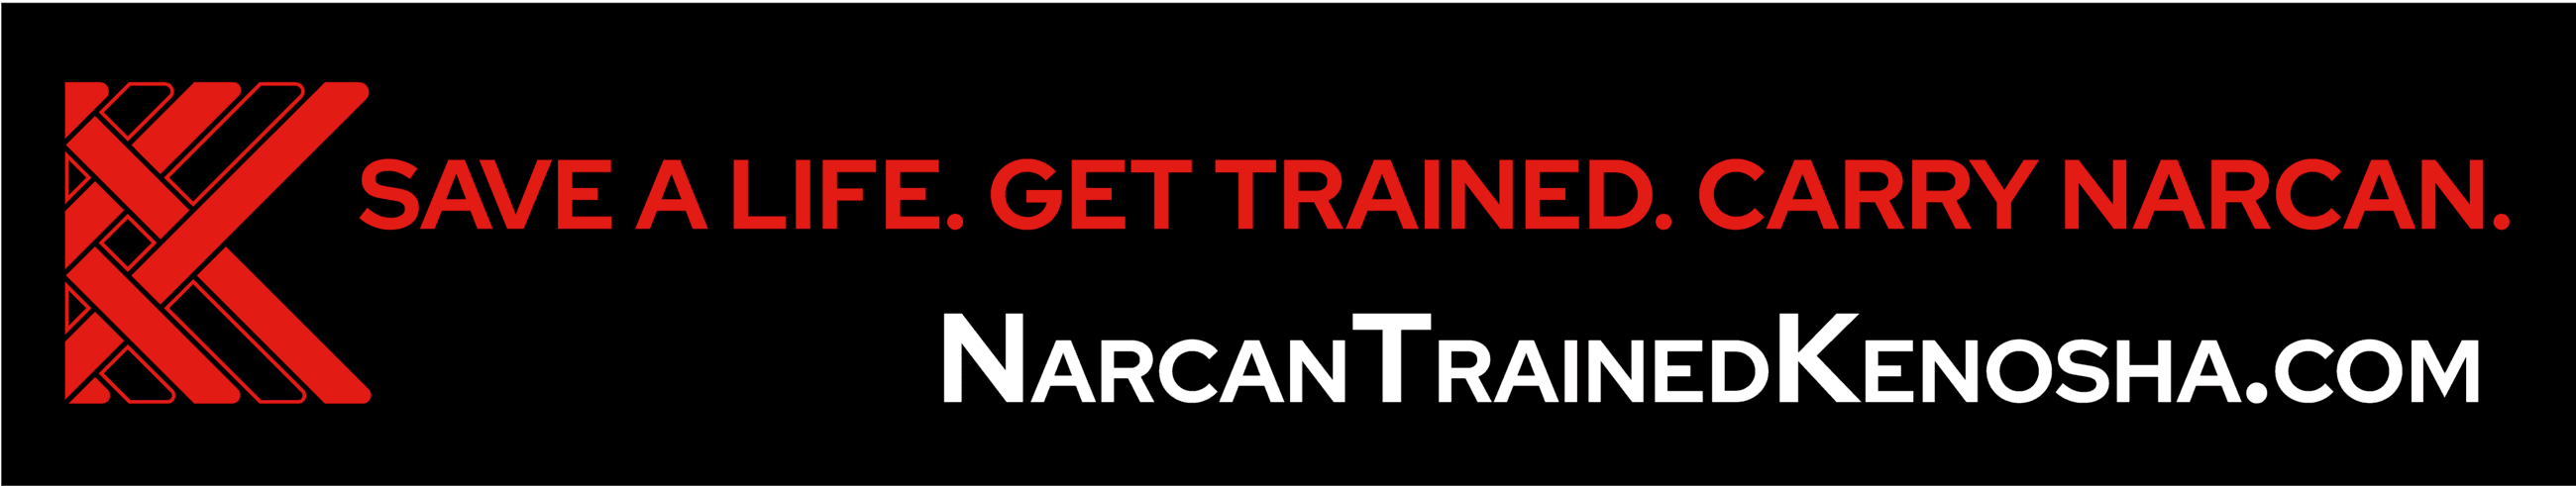 Save a life. Get trained. Carry Narcan. (Kenosha County Public Health)